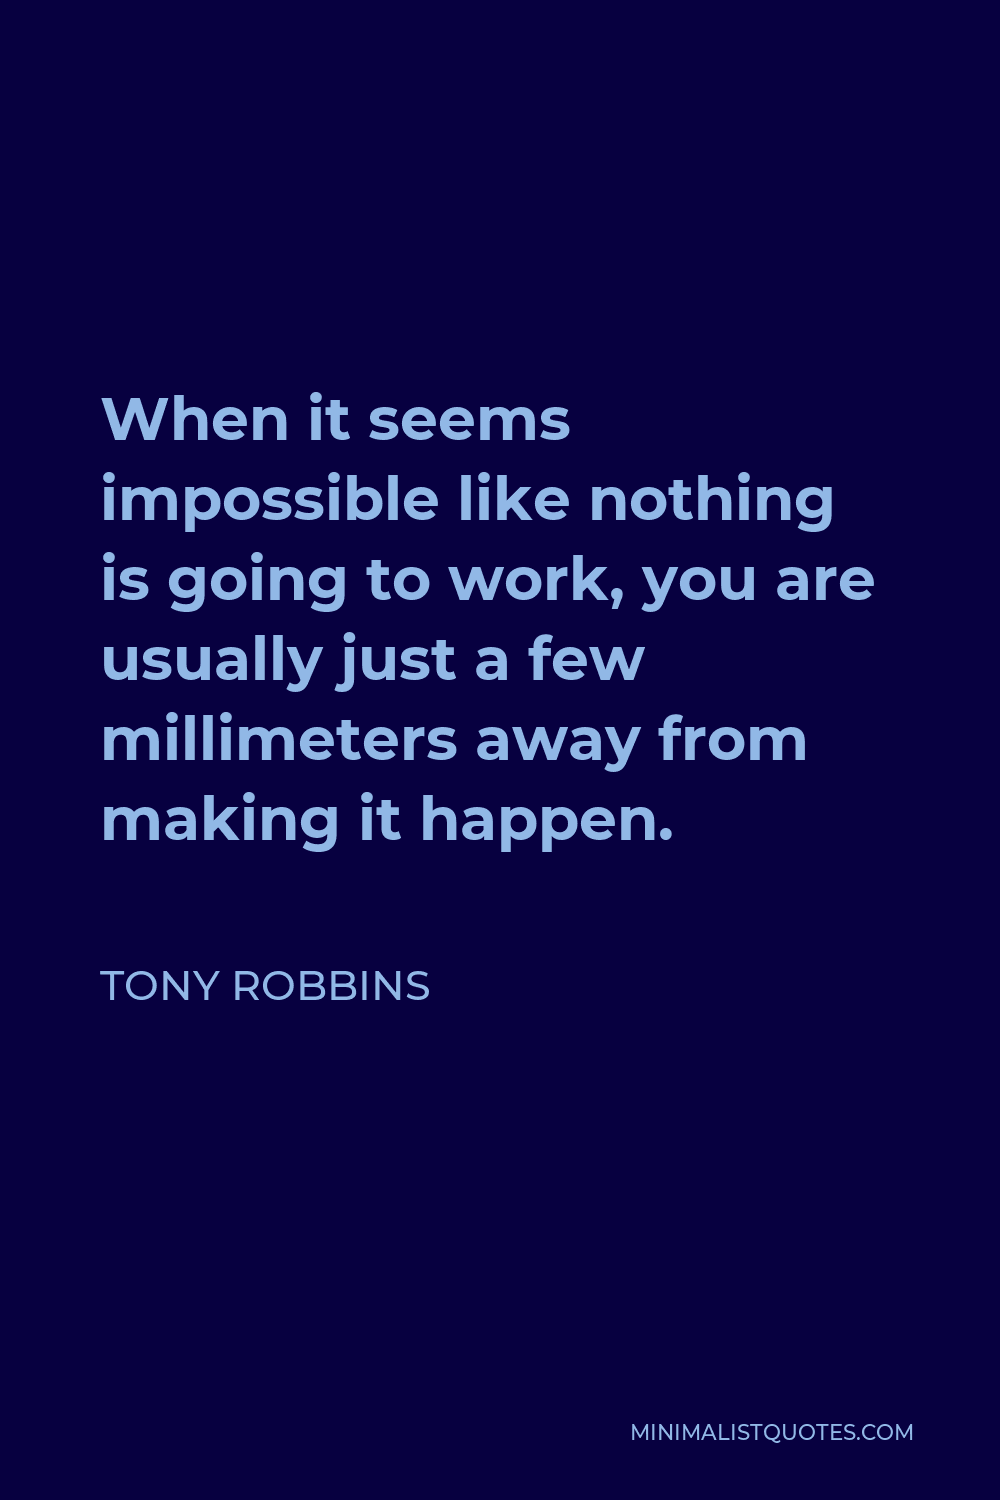 Tony Robbins Quote - When it seems impossible like nothing is going to work, you are usually just a few millimeters away from making it happen.